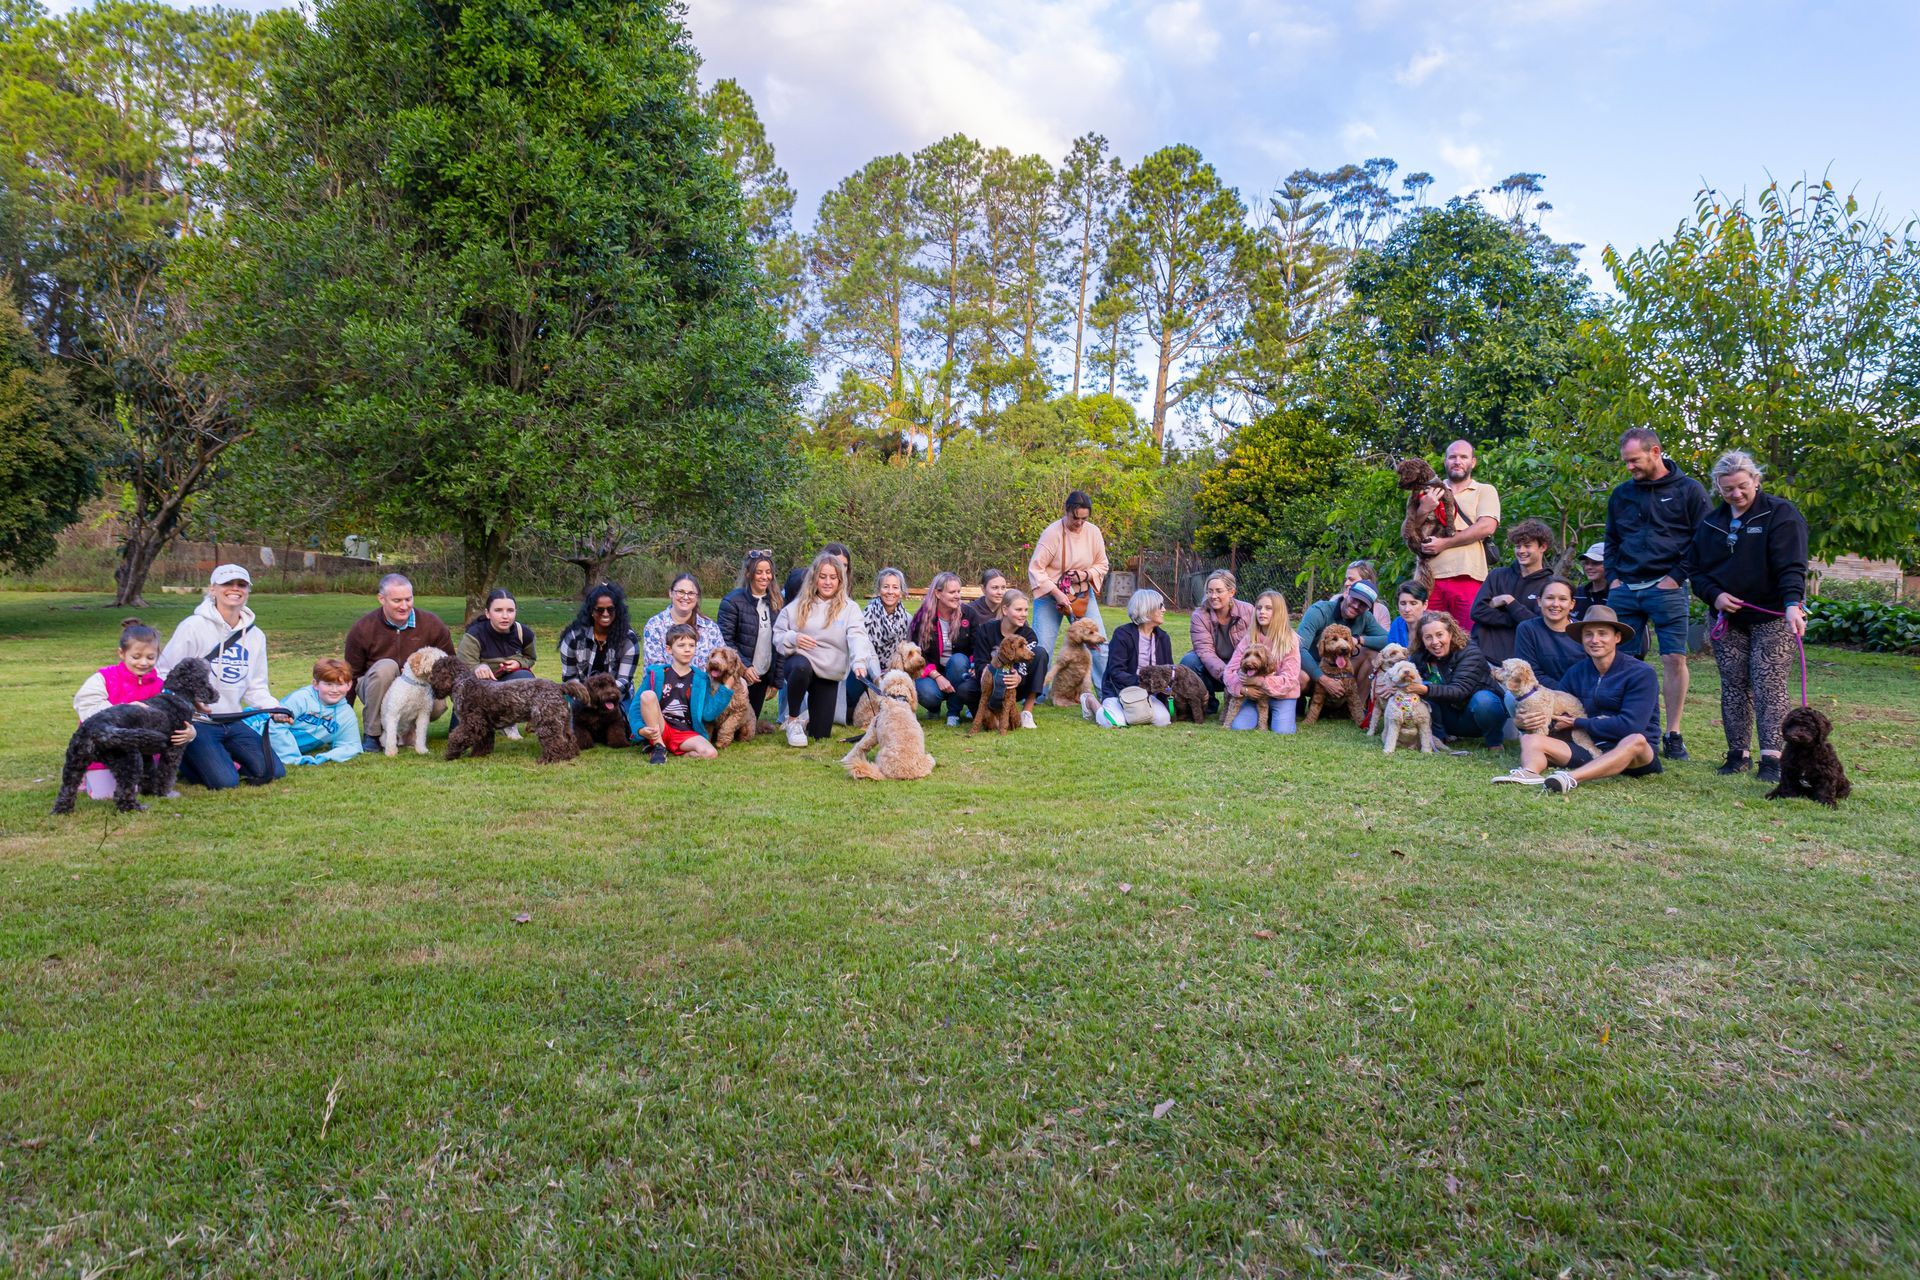 A group of people and their dogs are posing for a picture in a park.